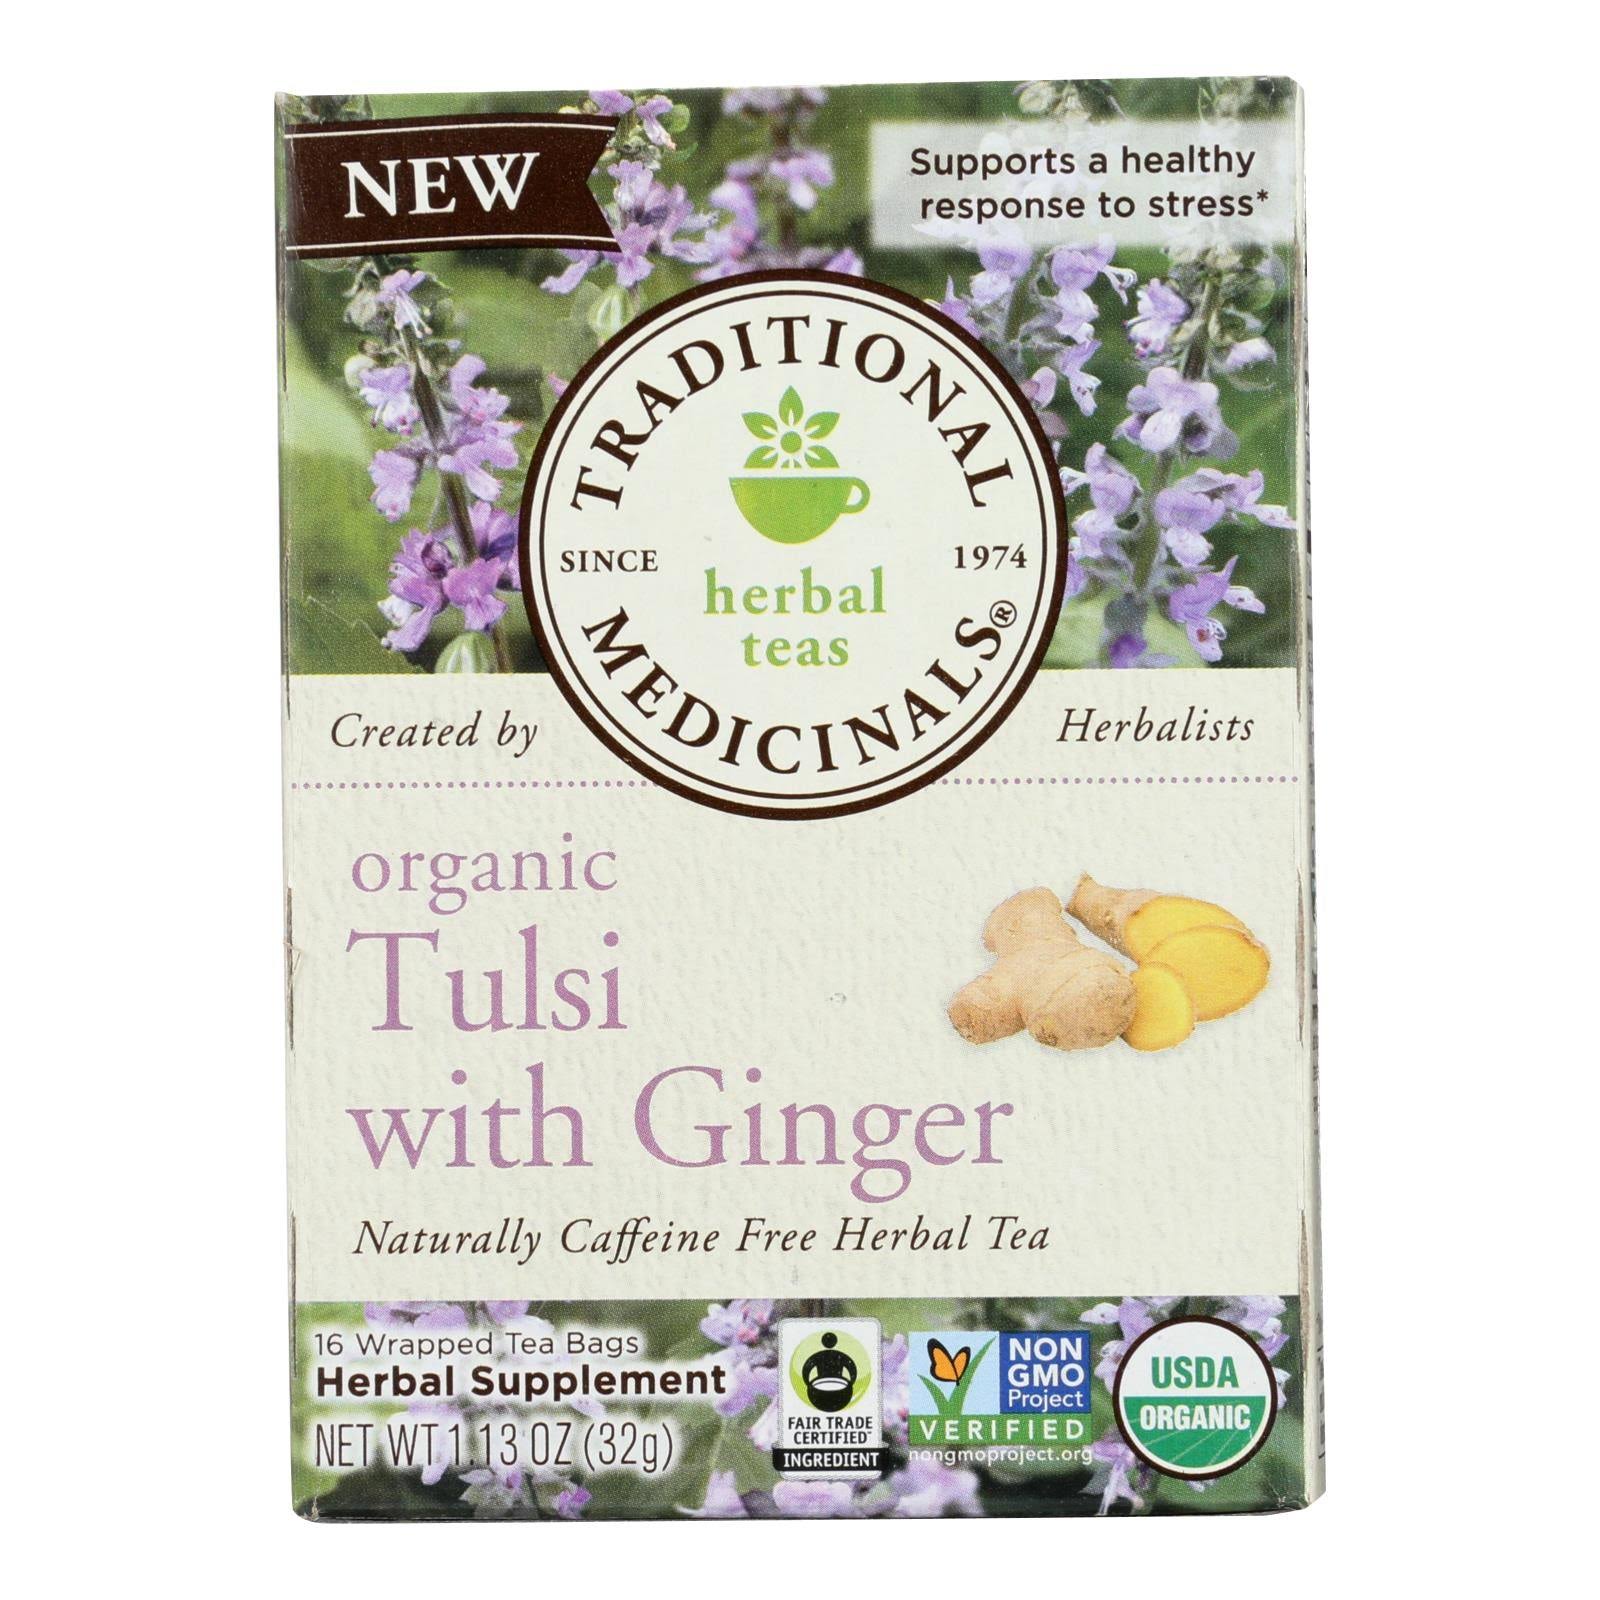 Traditional Medicinals Organic Tea Tulsi with Ginger 16 Bags